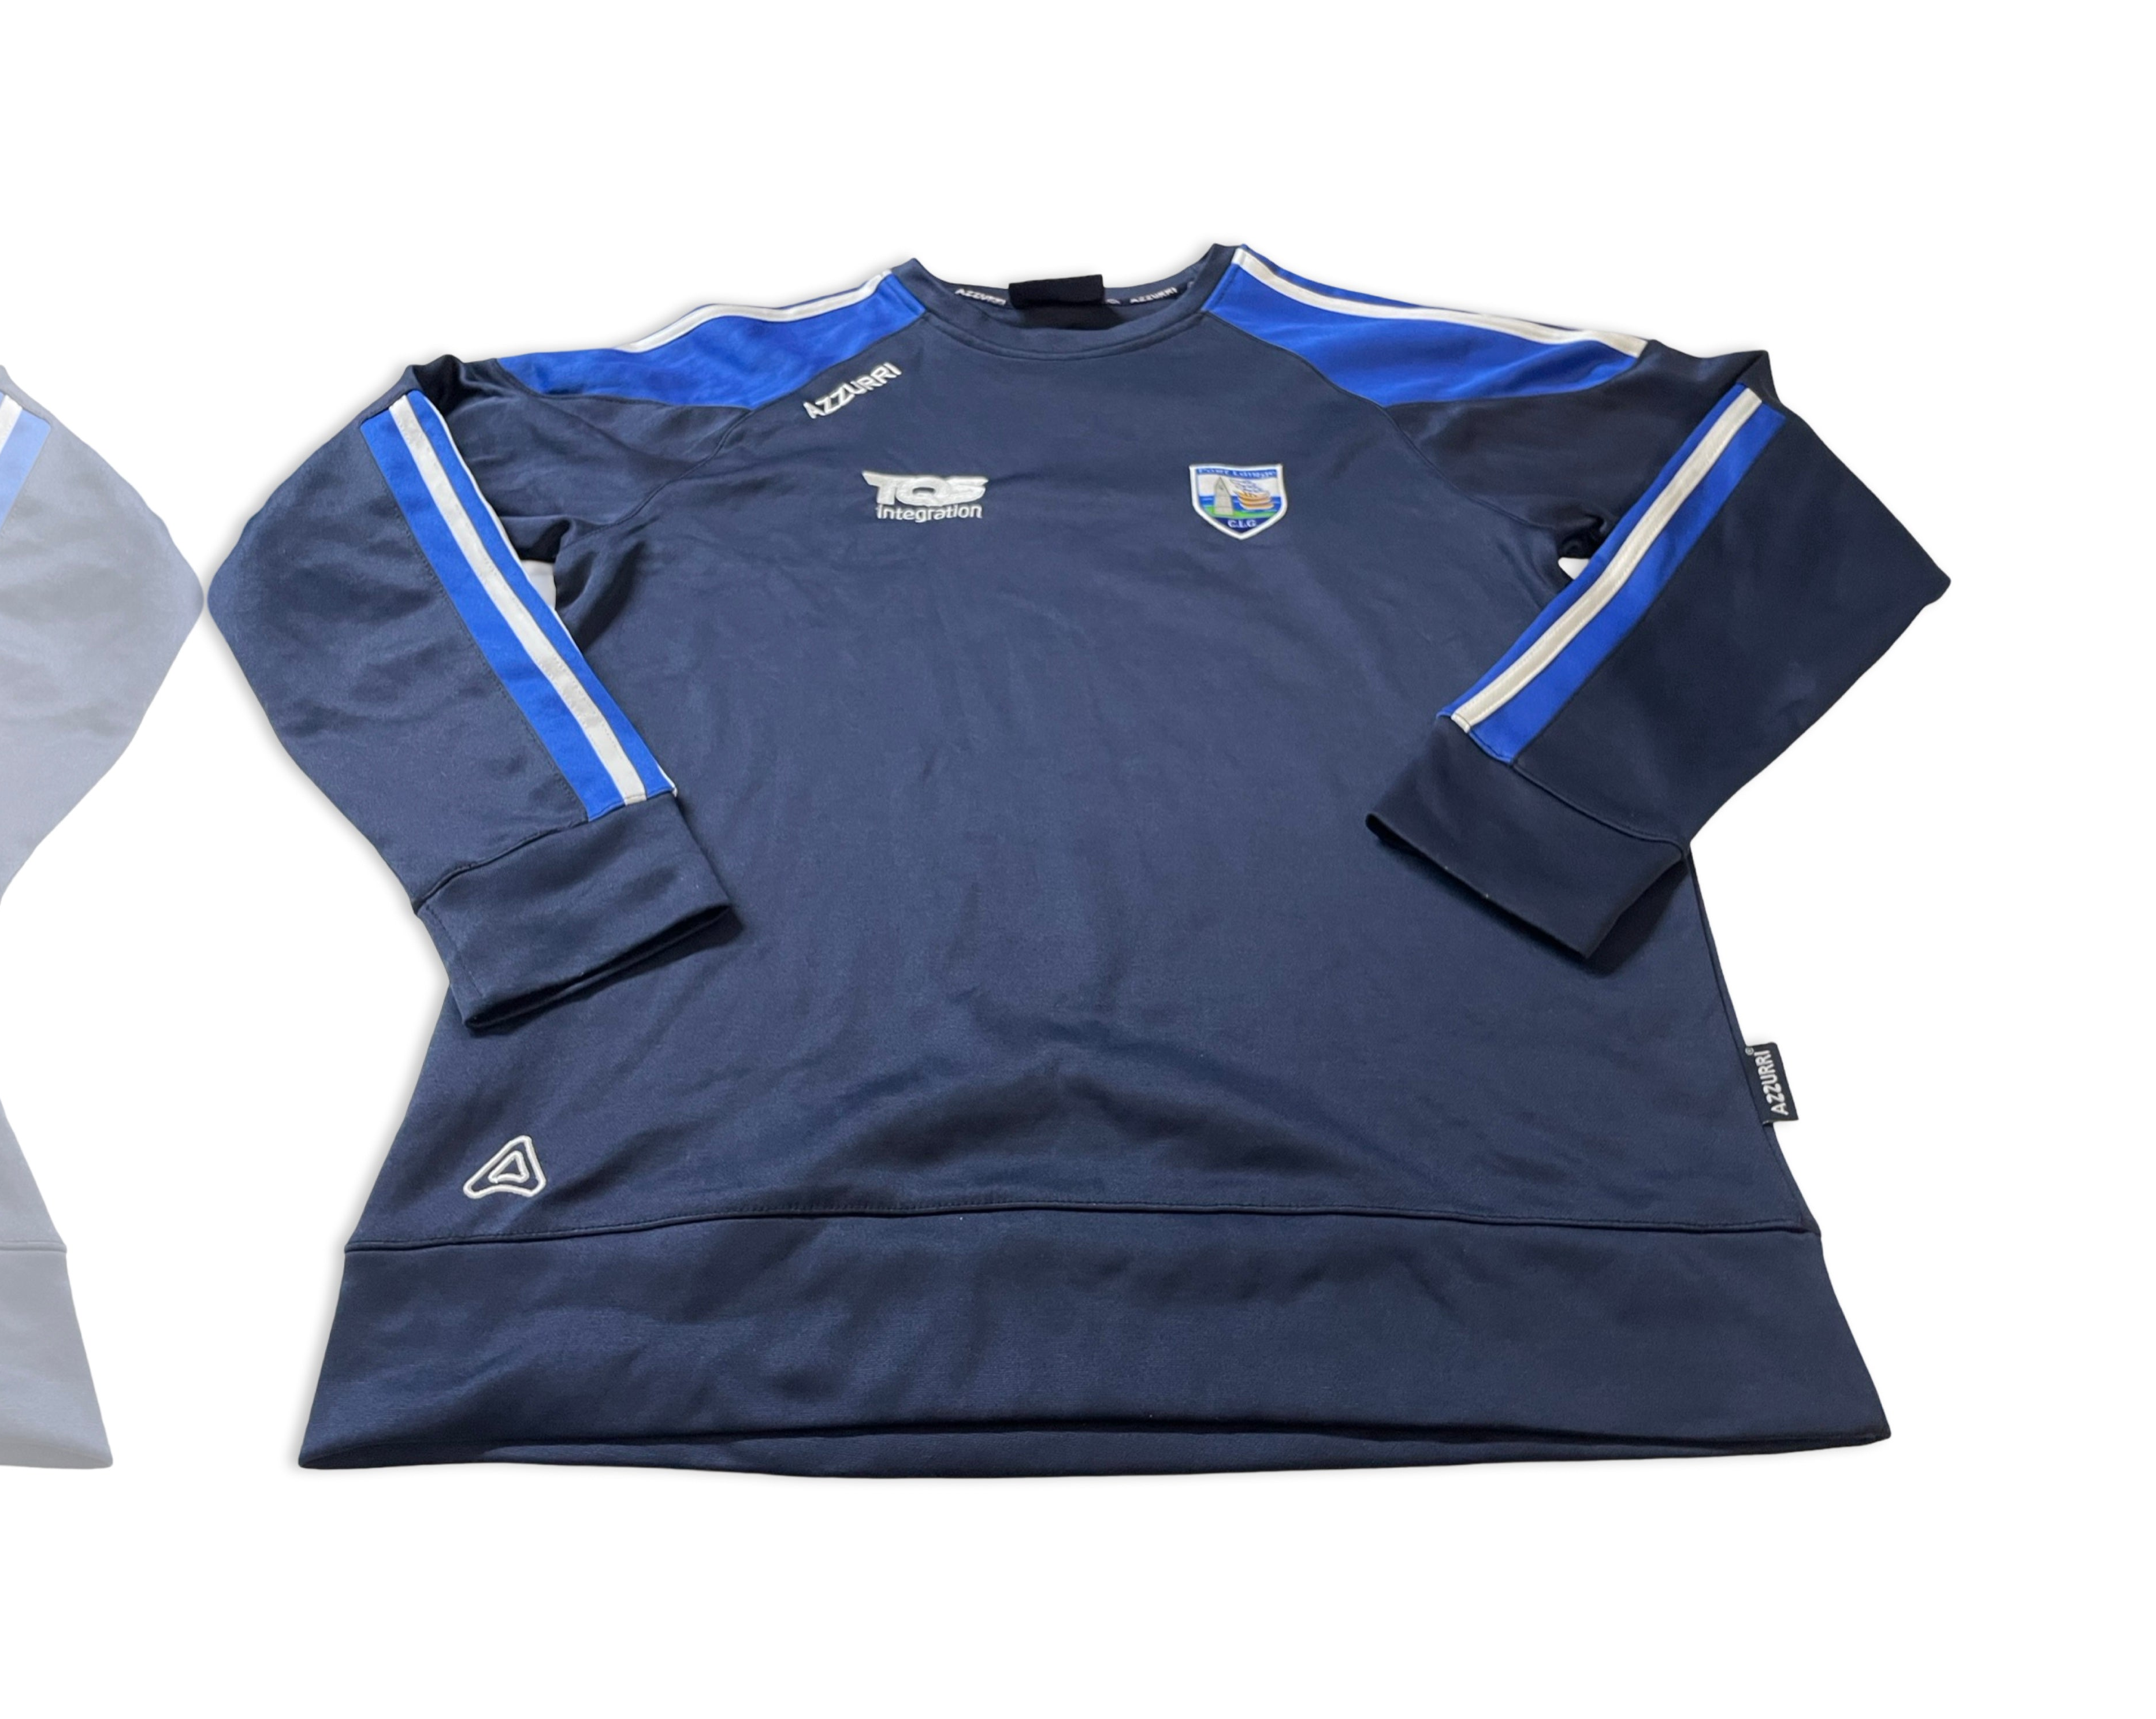 "Elevate your casual style with this Vintage Blue Azzurri Waterford GAA Town Sweatshirt, sized Small with measurements L28 W20SKU| 4267